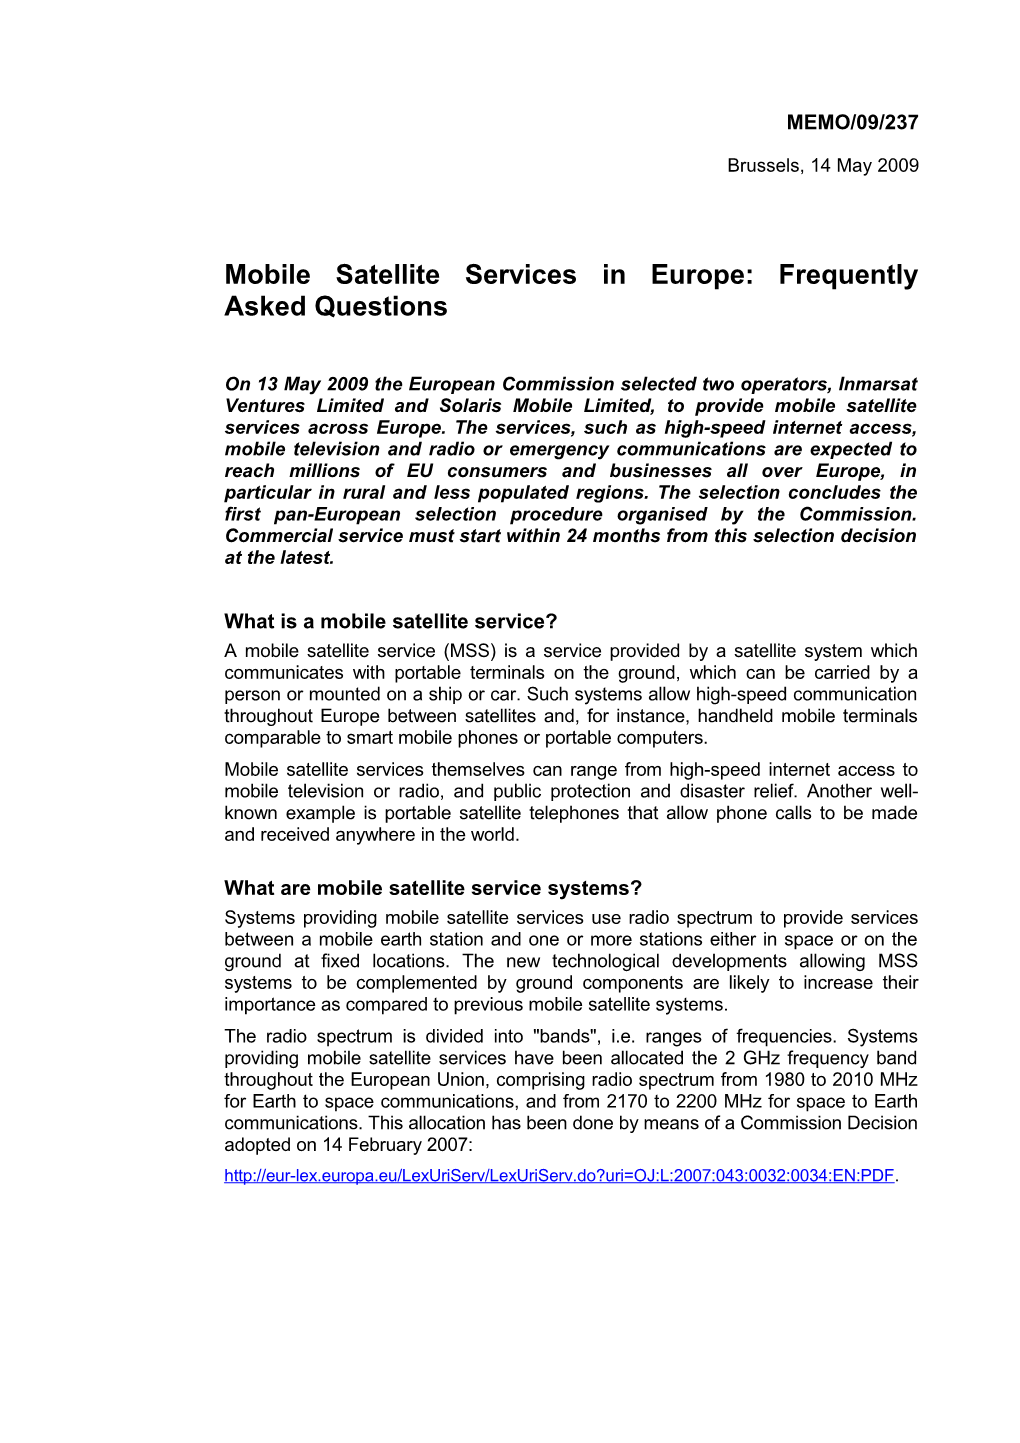 Mobile Satellite Services in Europe: Frequently Asked Questions